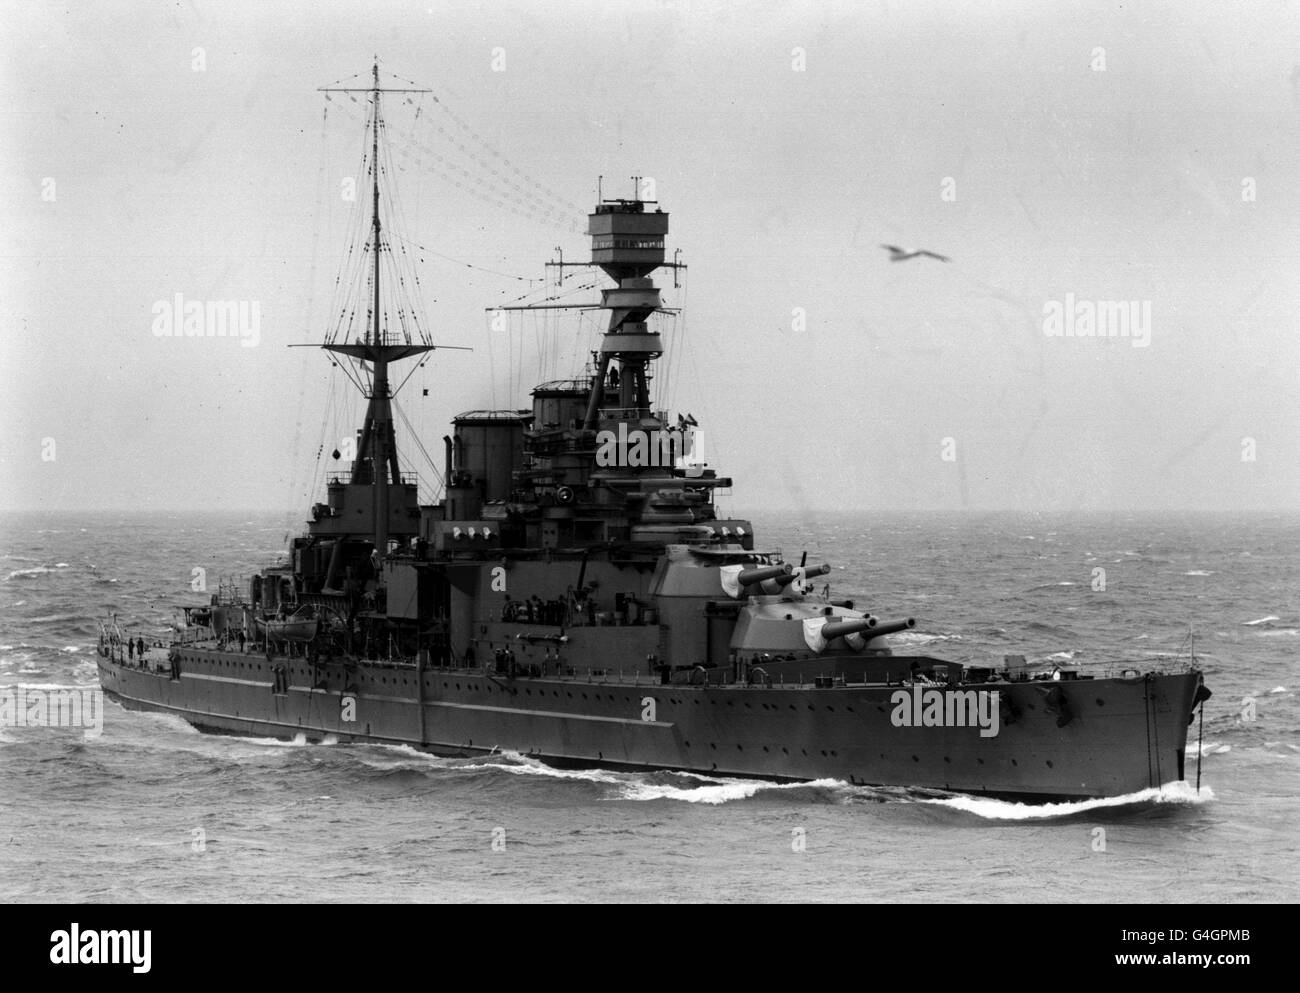 10/12/1941 - On this Day in History - the battleships HMS Repulse and HMS Prince of Wales were sunk by Japanese aircraft of the coast of Singapore. PA NEWS PHOTO 30/10/26 THE EMPIRE PREMIERS VISIT THE BRITISH ATLANTIC FLEET: THE BATTLE CRUISER HMS REPULSE STEAMING INTO ACTION Stock Photo